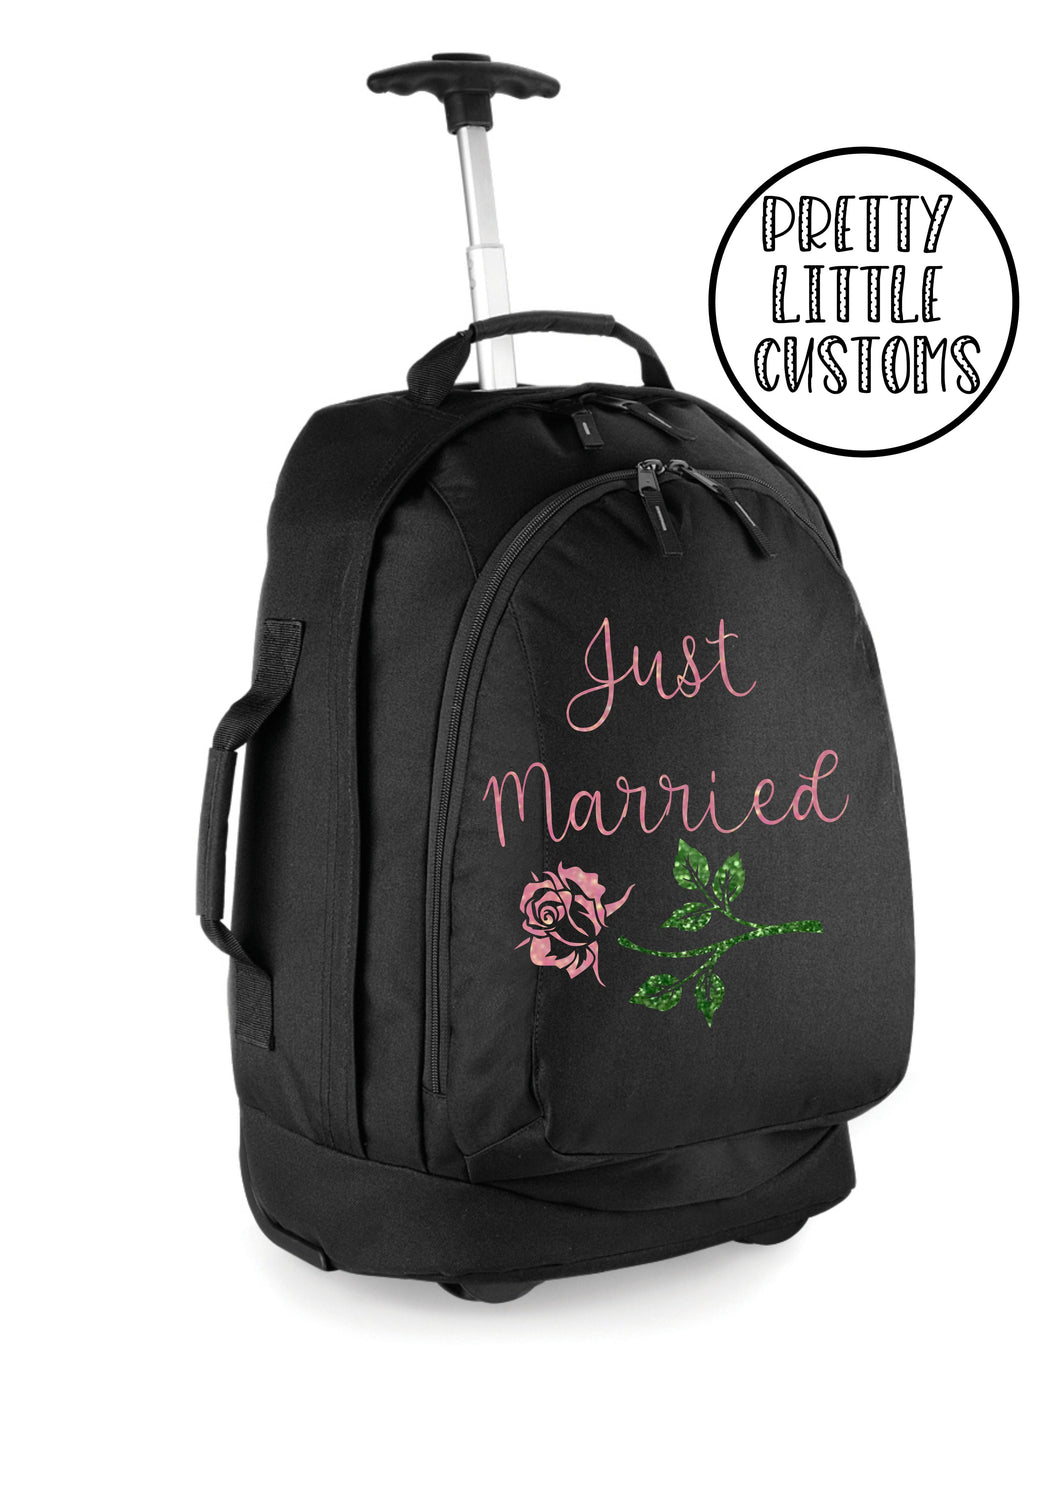 Personalised honeymoon travel bag /cabin luggage size suitcase - glitter Just Married rose design